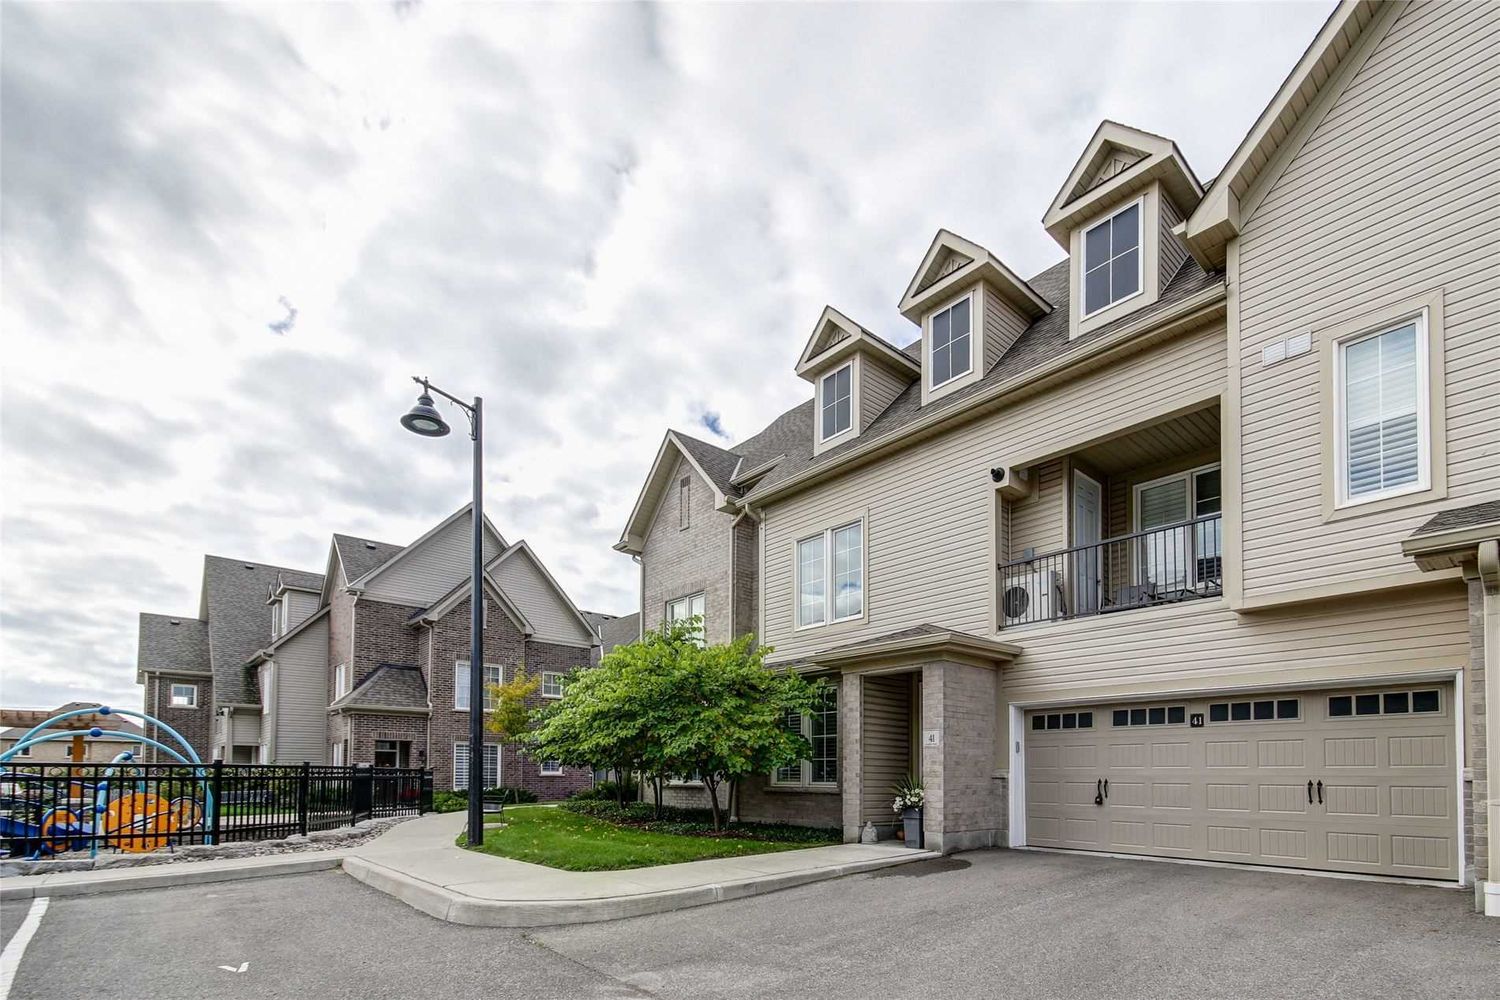 1430 Gord Vinson Avenue. McLaughlin Heights Townhomes is located in  Clarington, Toronto - image #3 of 3